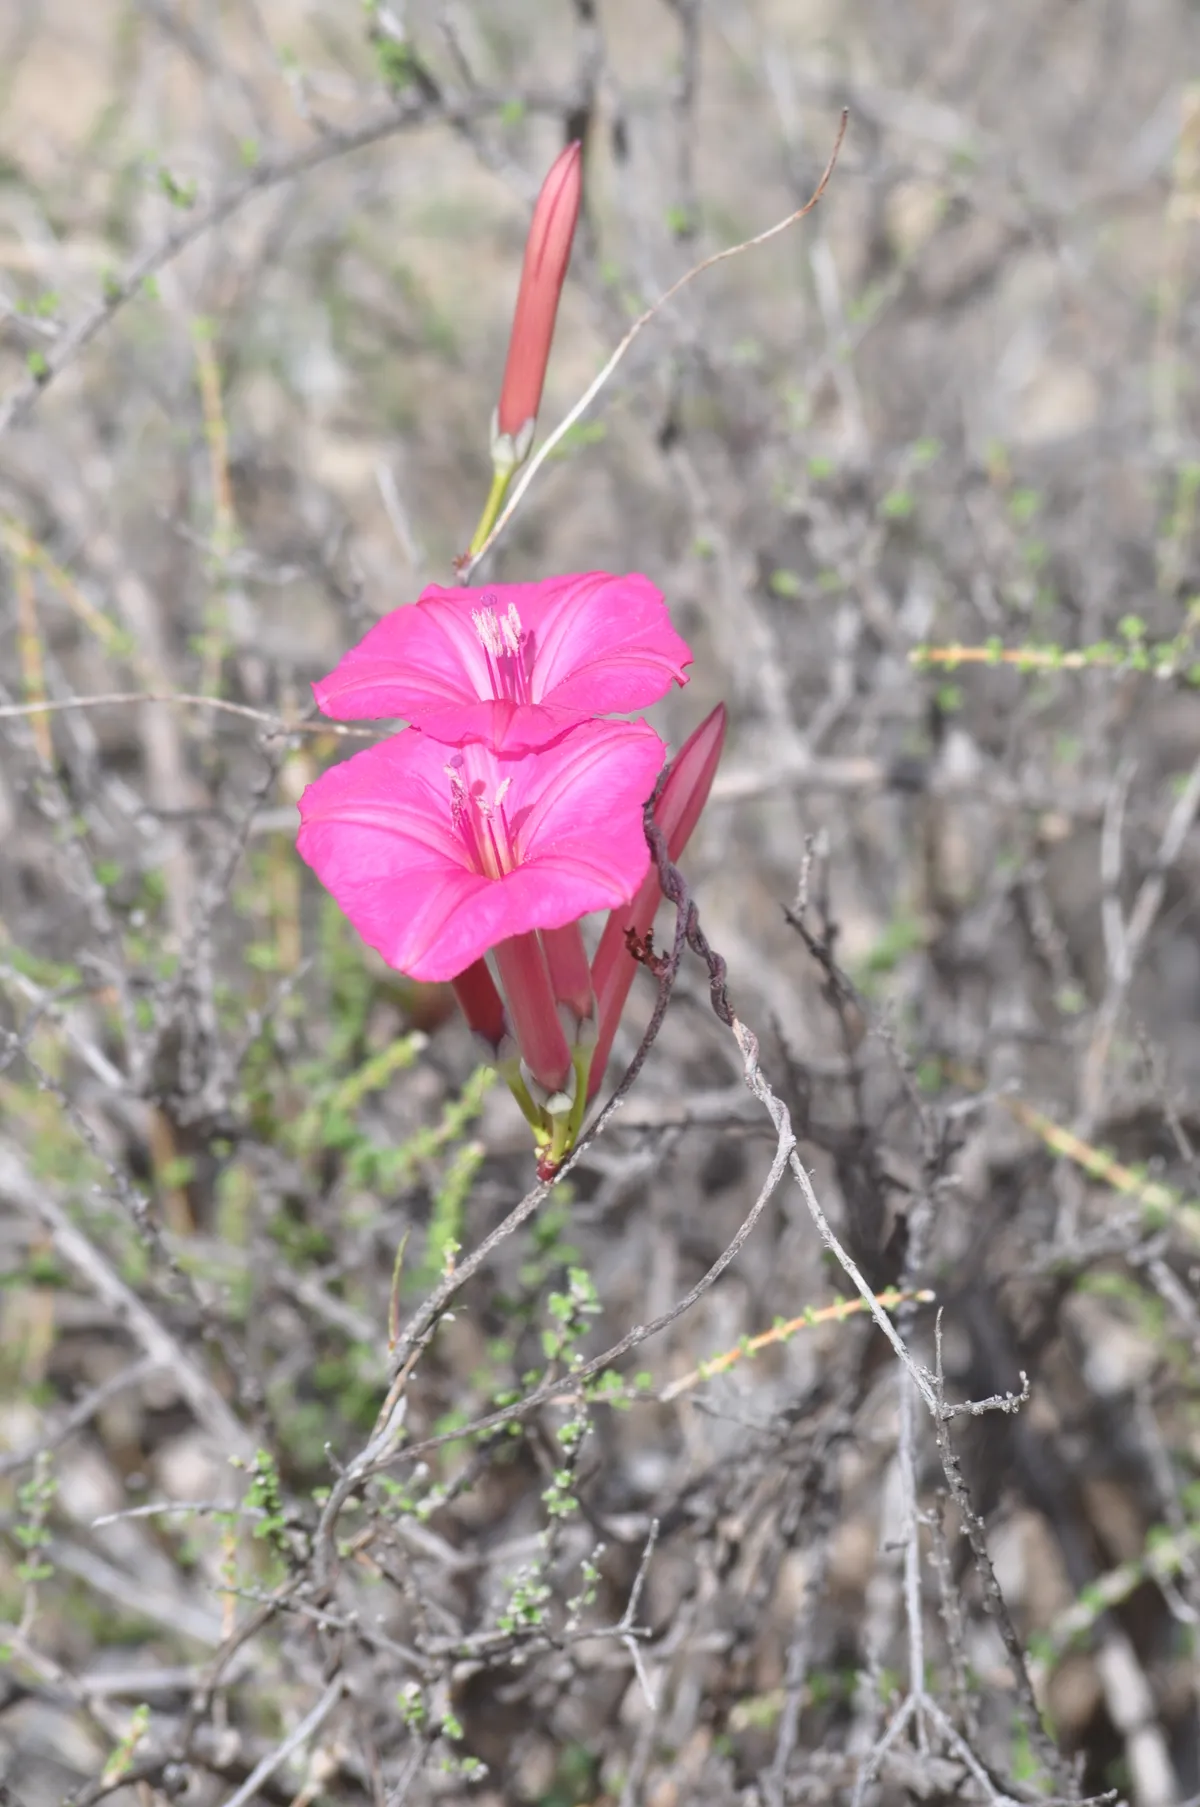 Ipomoea noemana is from the same family as the sweet potato and was well known by local communities before its official scientific naming. © Enoc Jara